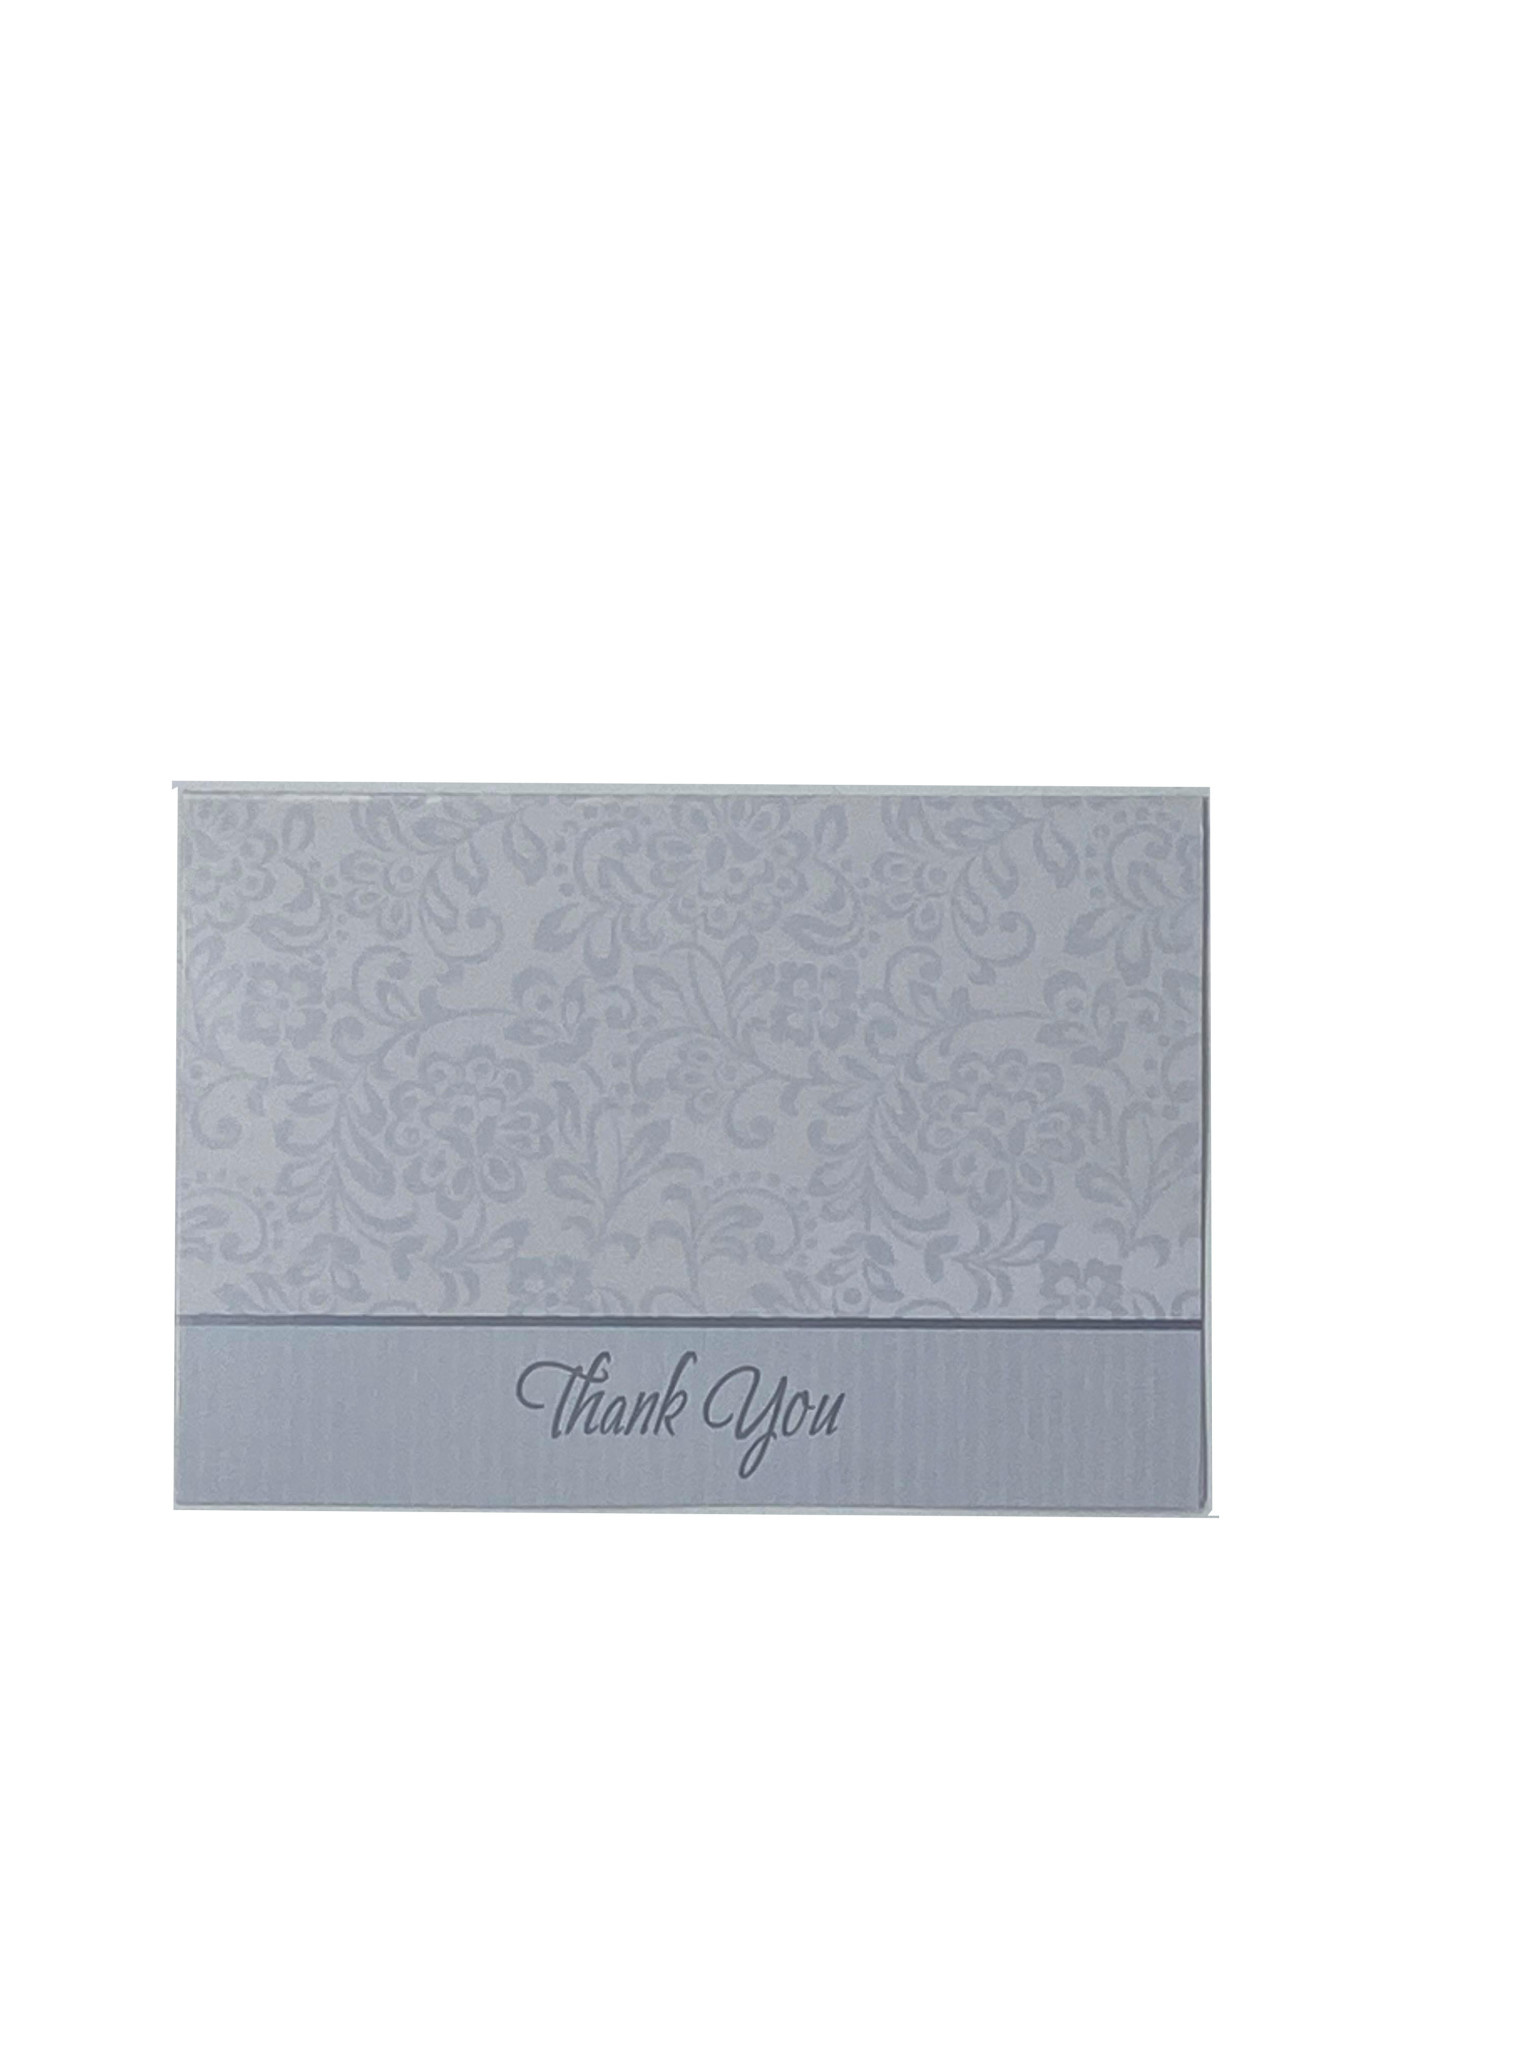 Silver Thank You Wedding Traditions Cards - 25 ct